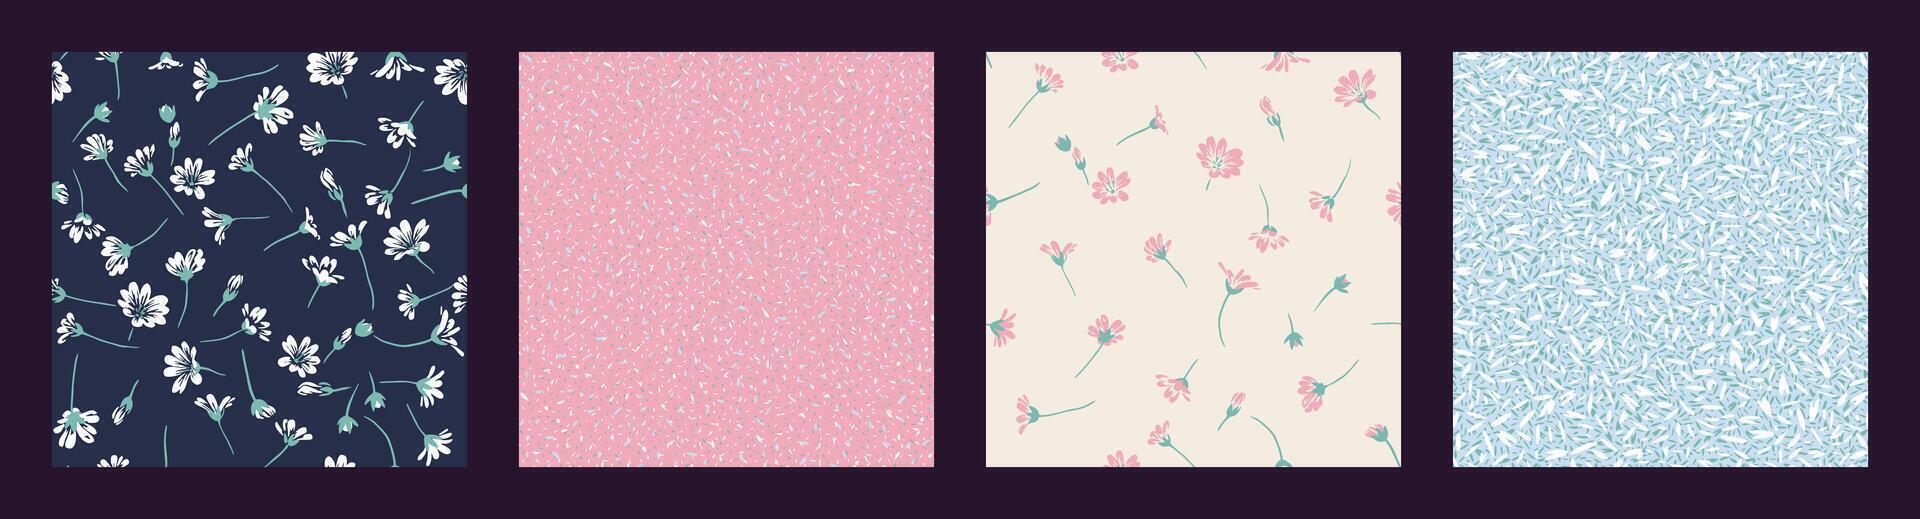 Pastel pink collage of set seamless patterns with simple abstract ditsy daisy flowers. Vector hand drawn sketch shape, silhouettes gently floral, random spots, polka dots.Templates for design